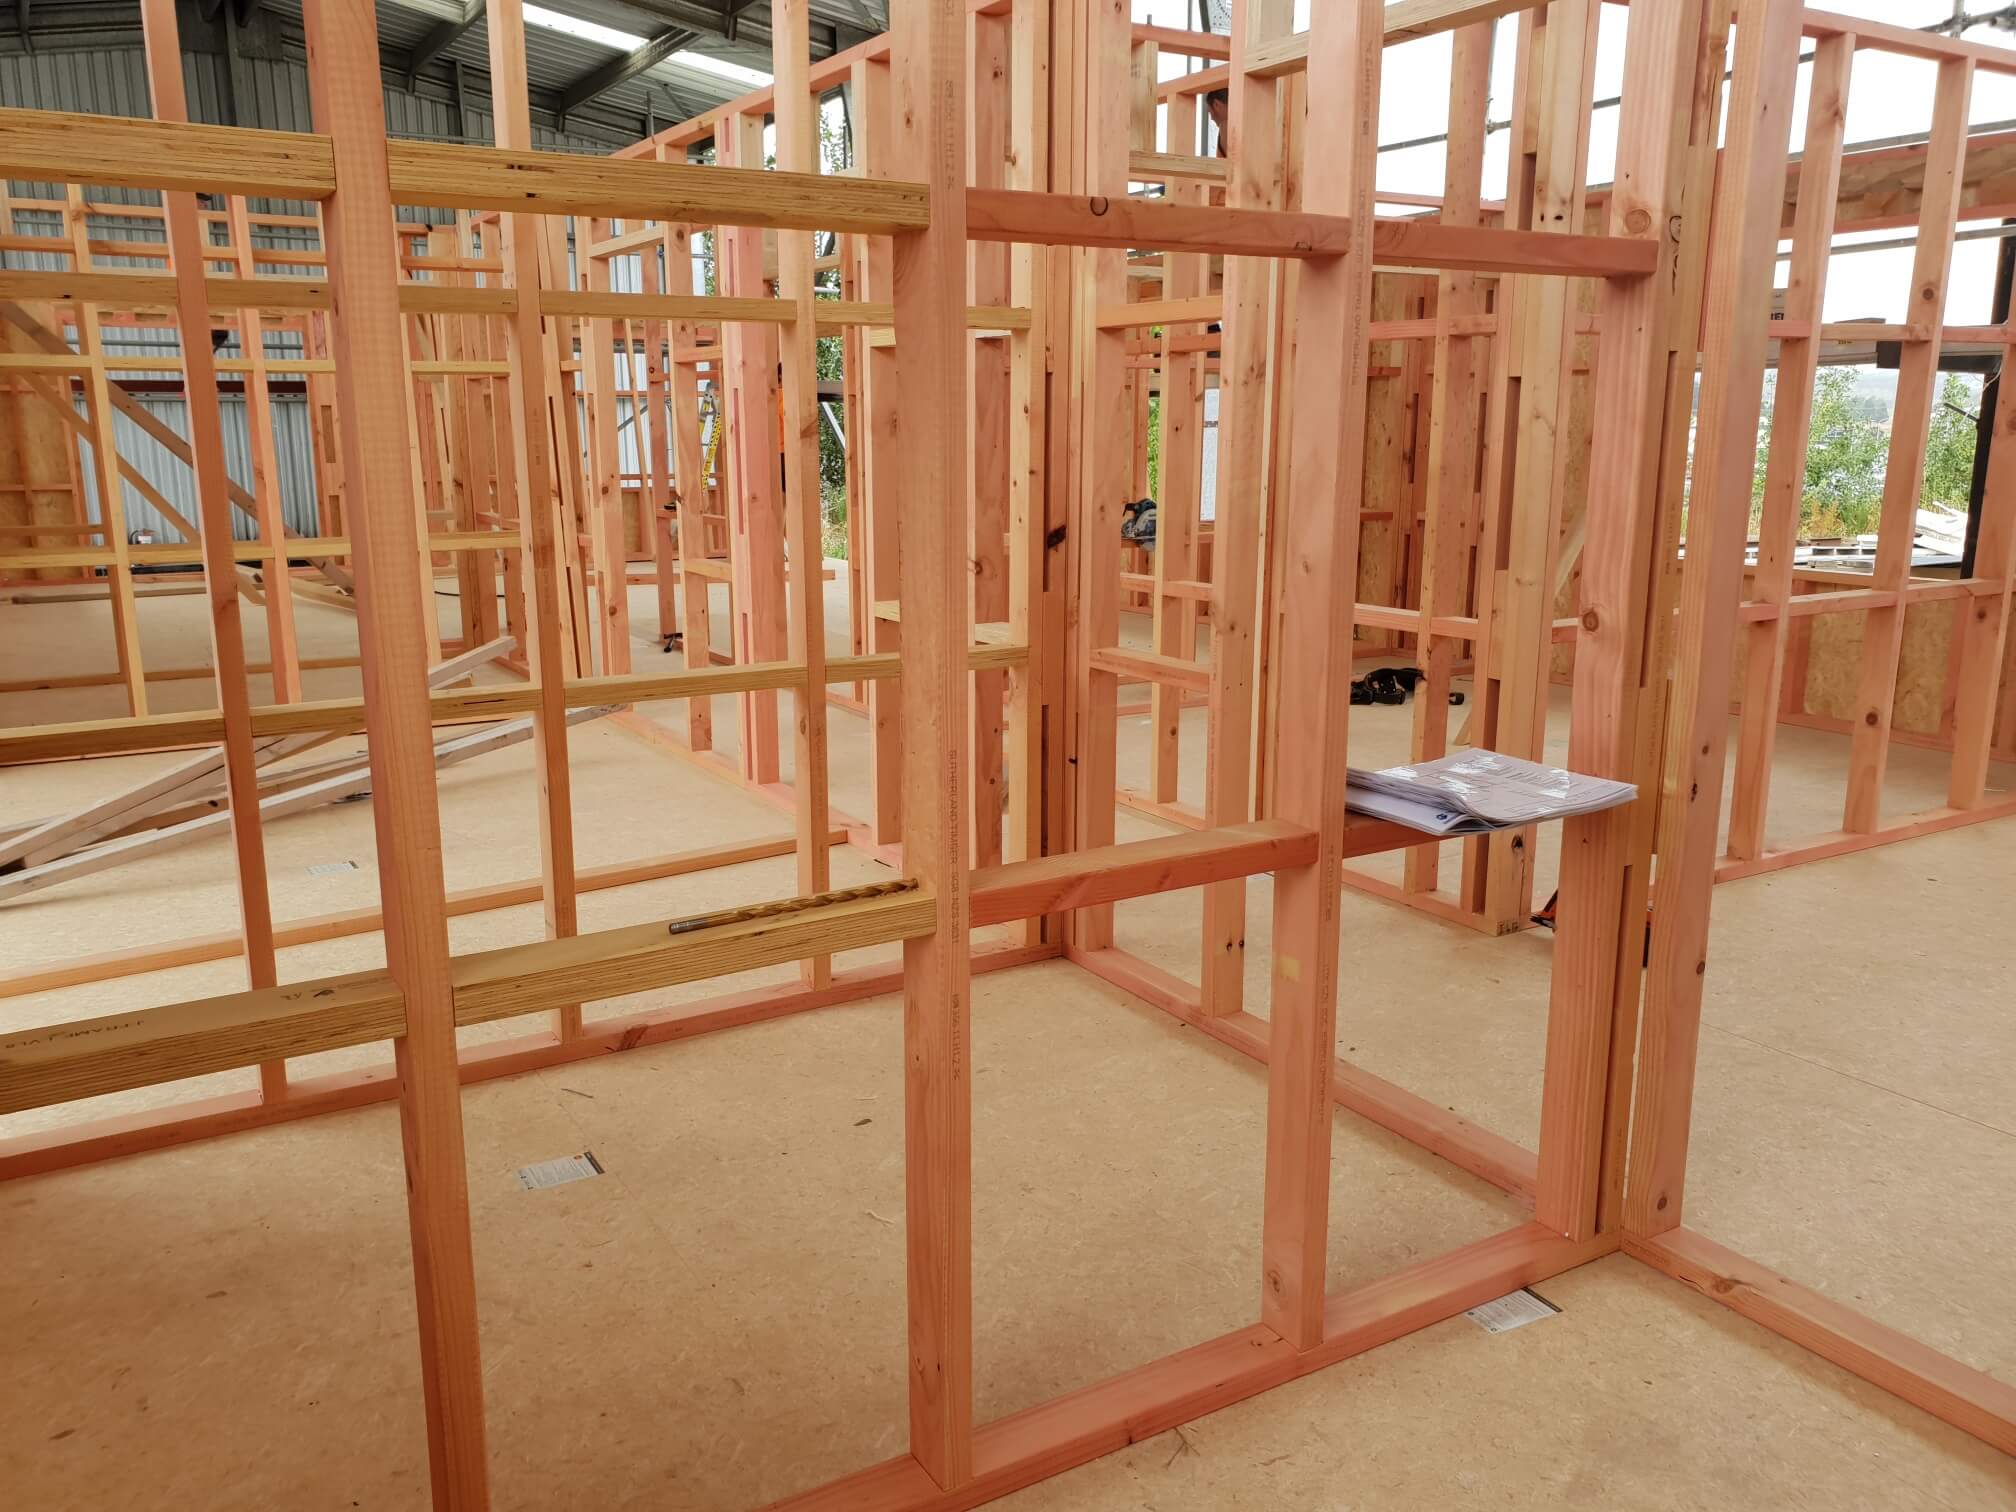 Check out the factory stages of constructing our prefabricated homes!